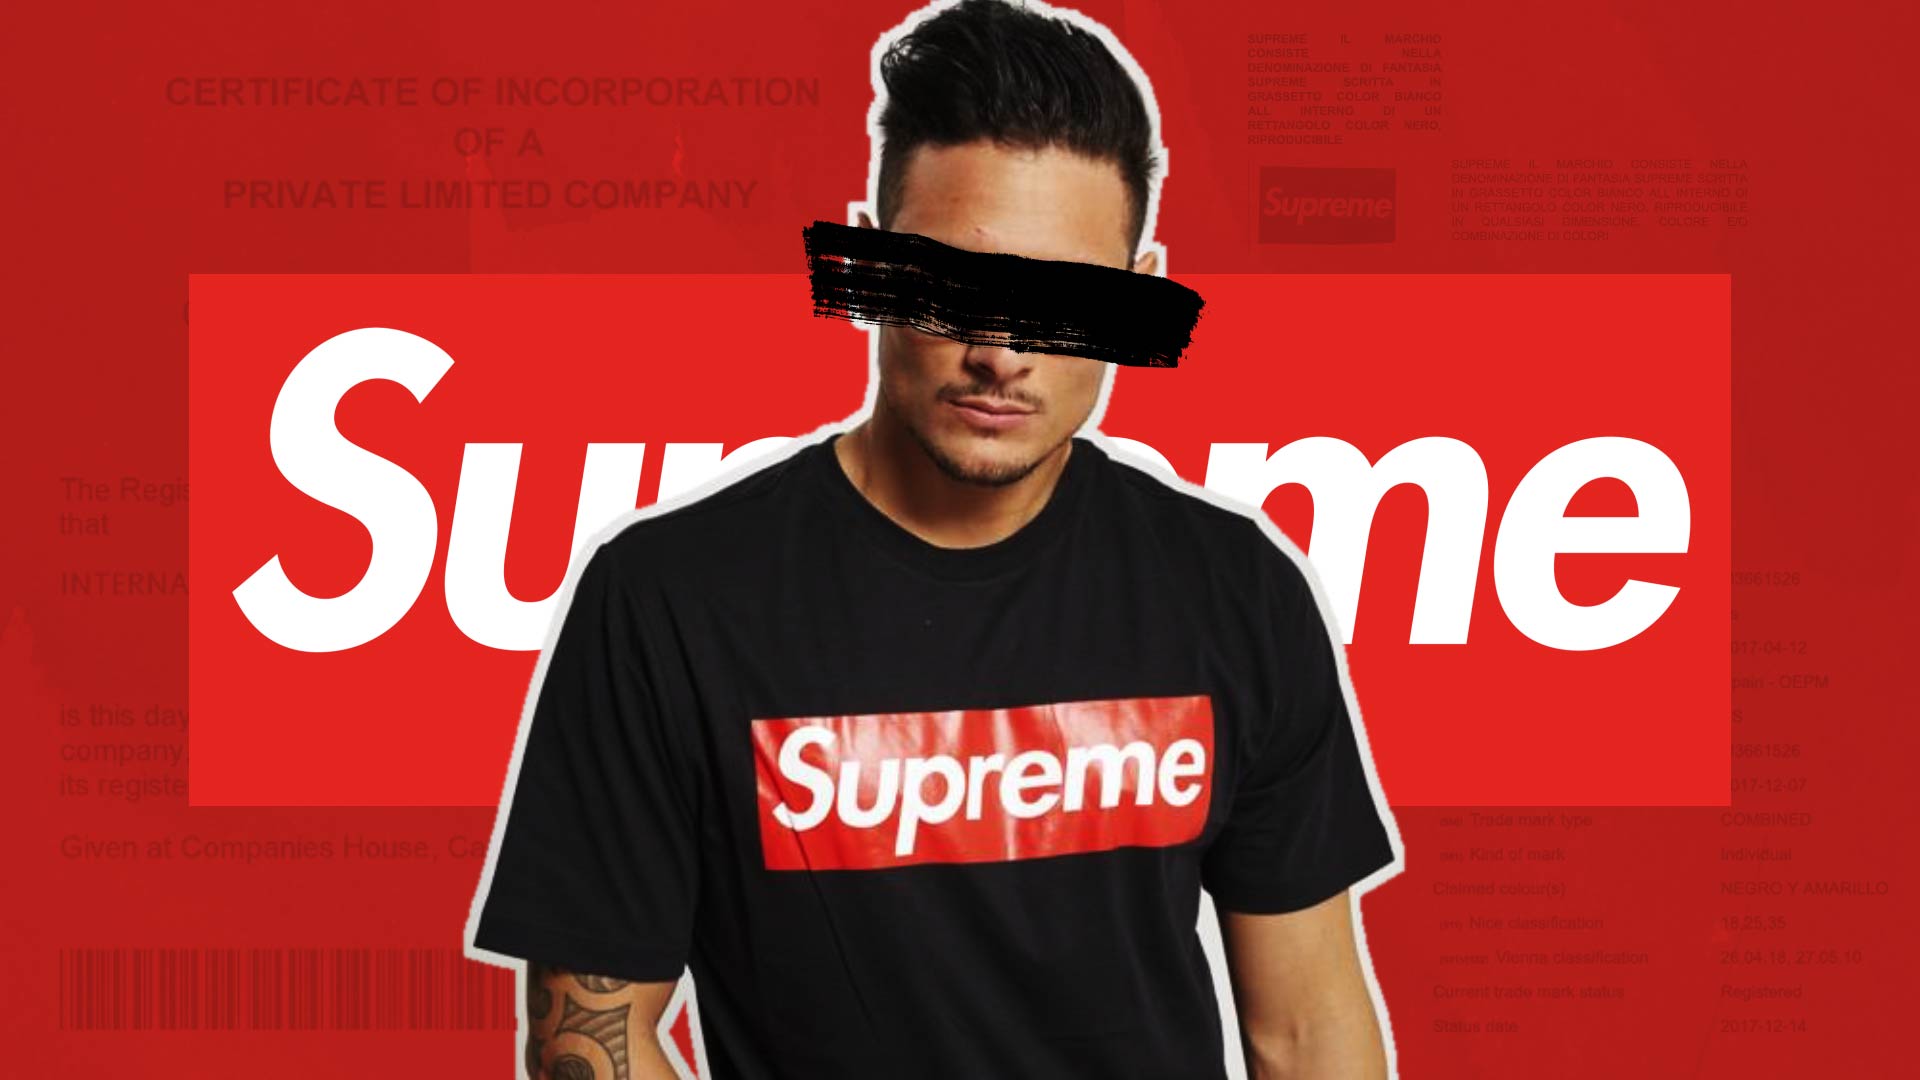 253 Supreme T-shirts expected to sell for $2M in Christie's sale 